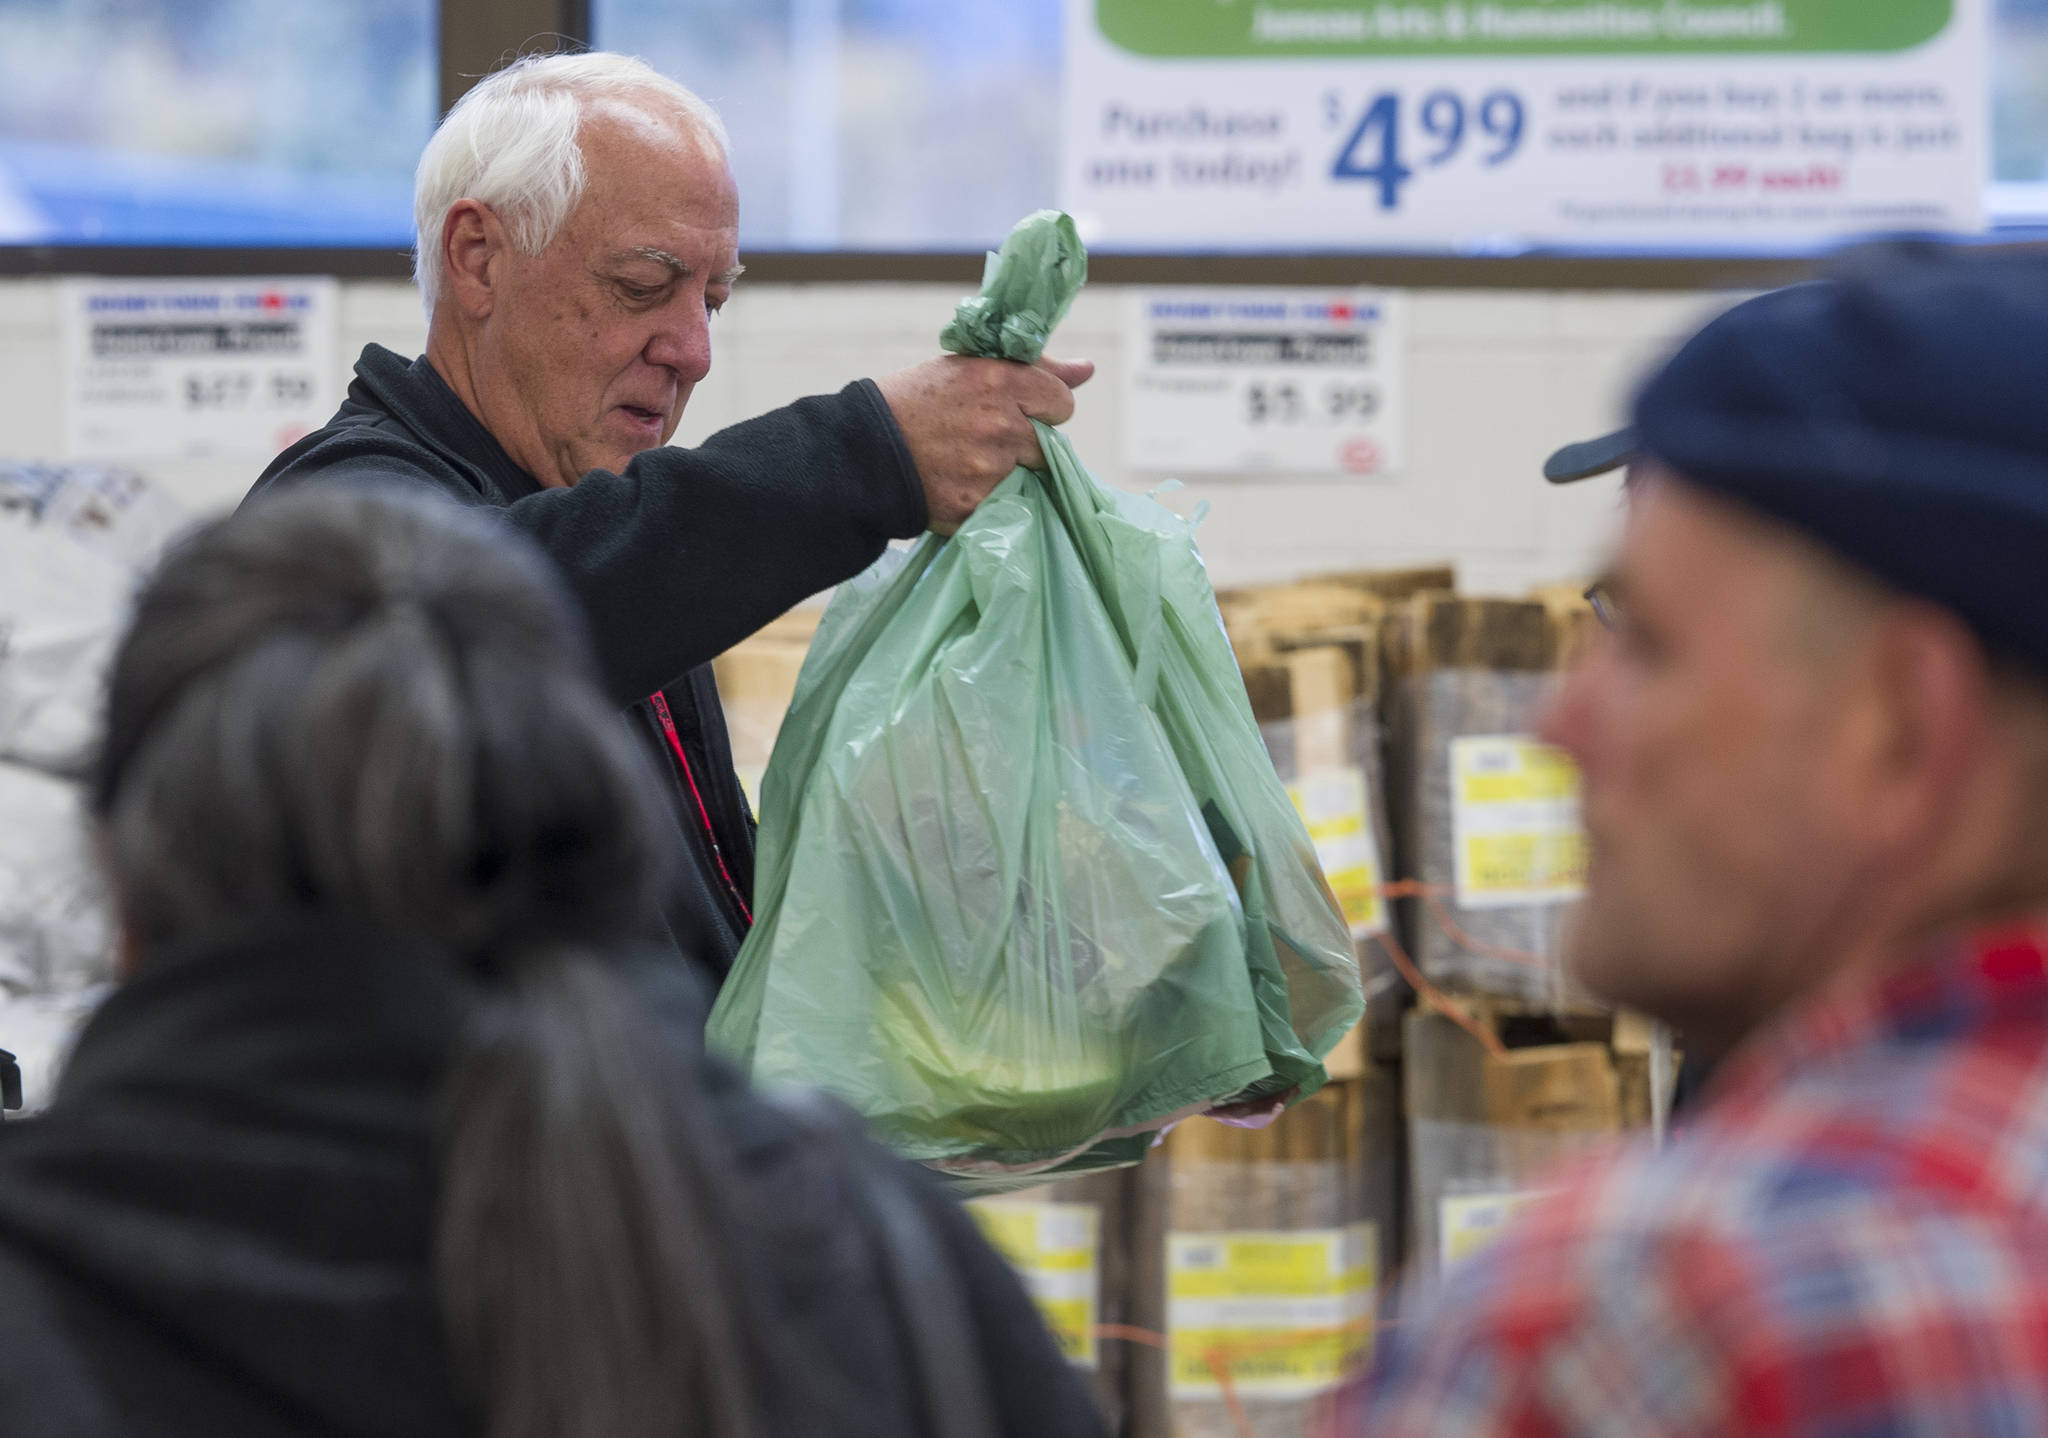 Mayor Ken Koelsch bags groceries for customers during an event at Super Bear in October 2016. (Michael Penn | Juneau Empire File)